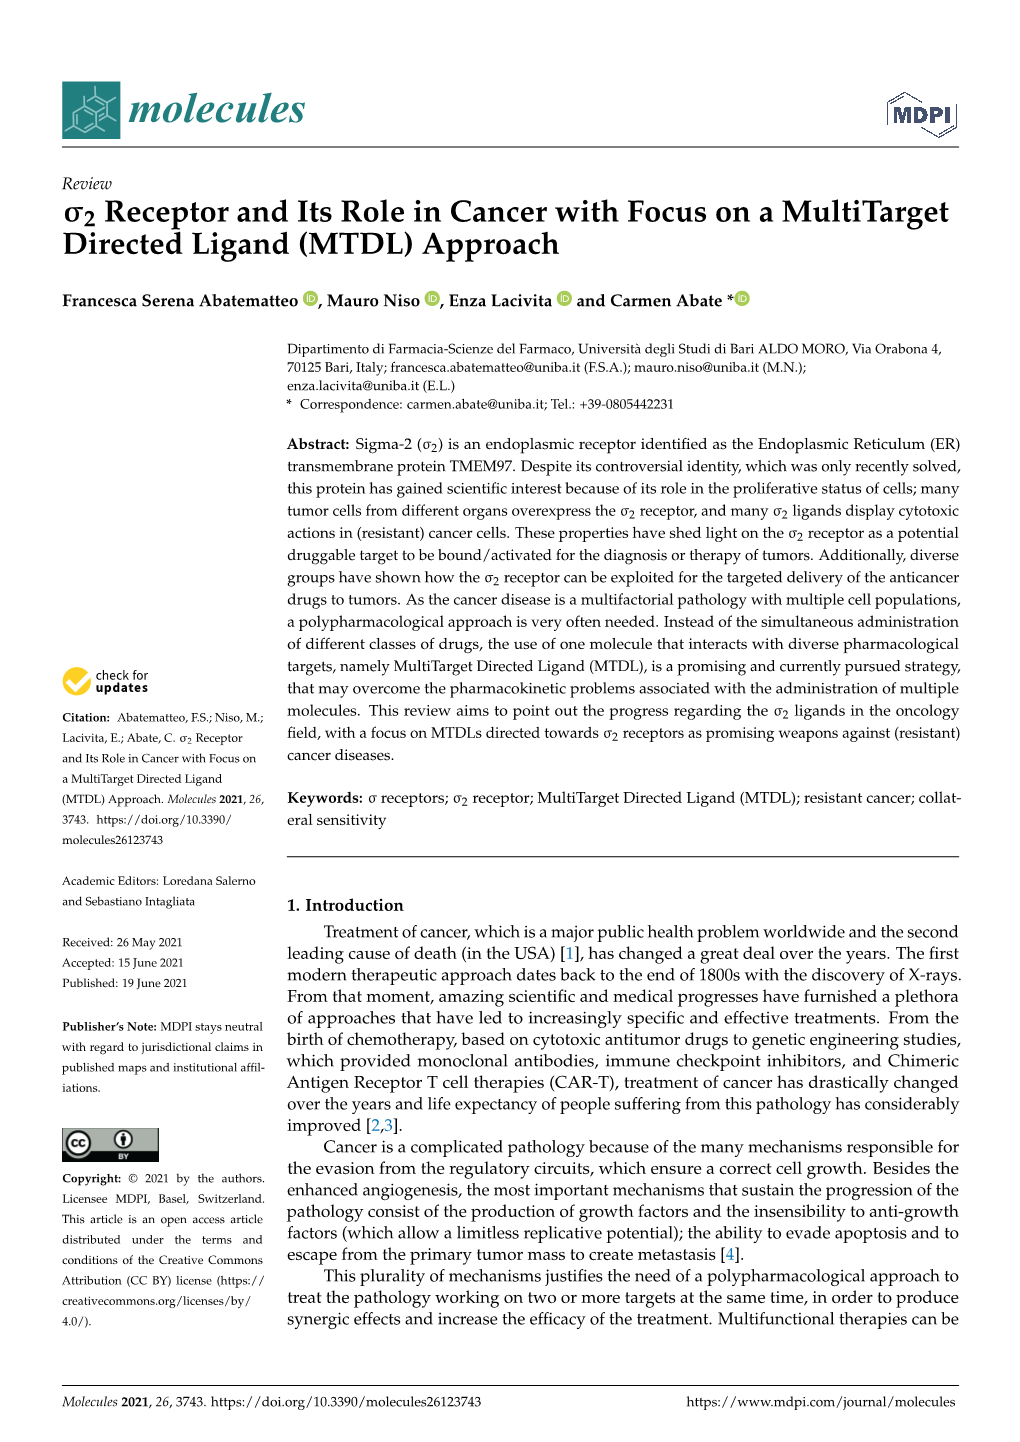 2 Receptor and Its Role in Cancer with Focus on a Multitarget Directed Ligand (MTDL) Approach